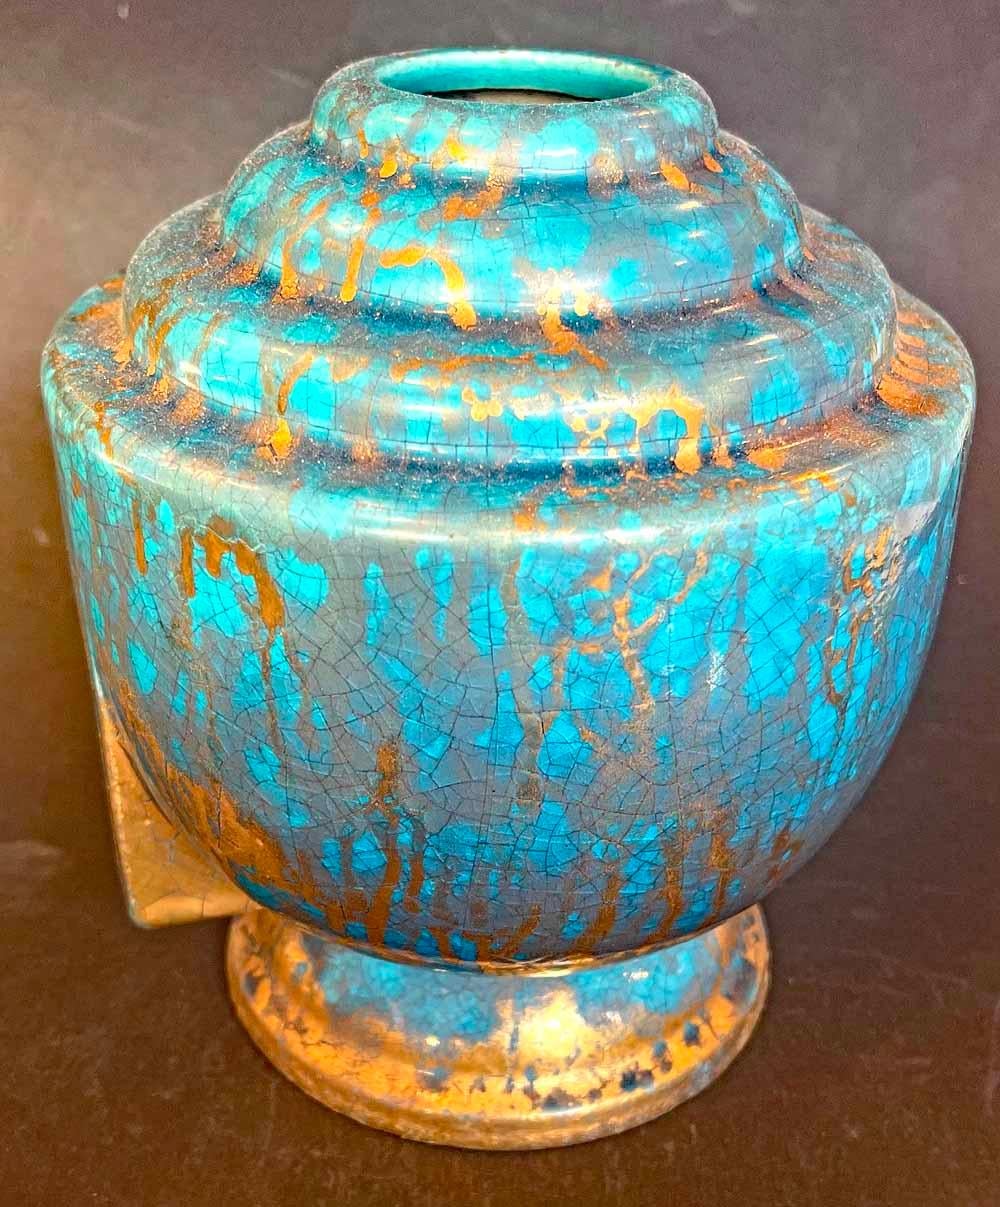 This classic French Art Deco vase demonstrates a major characteristic of the period -- a series of setbacks from its curving body to the neck above -- all brilliantly glazed in a Mediterranean blue-green with rich veining in gold. The piece was made